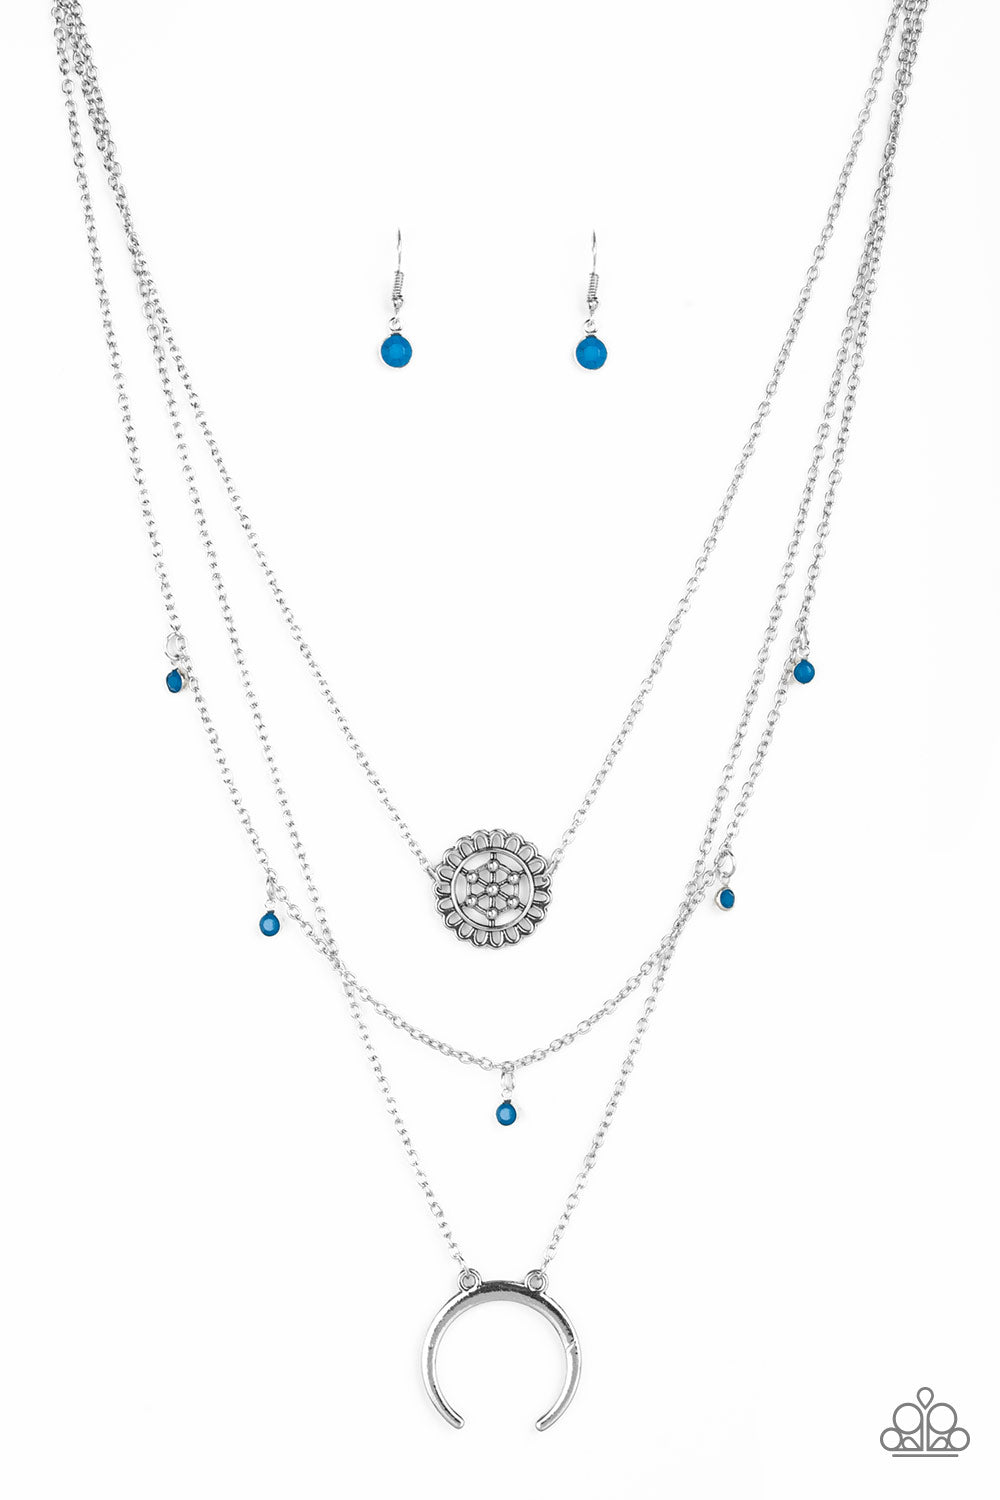 Lunar Lotus Paparazzi Accessories Necklace with Earrings Blue